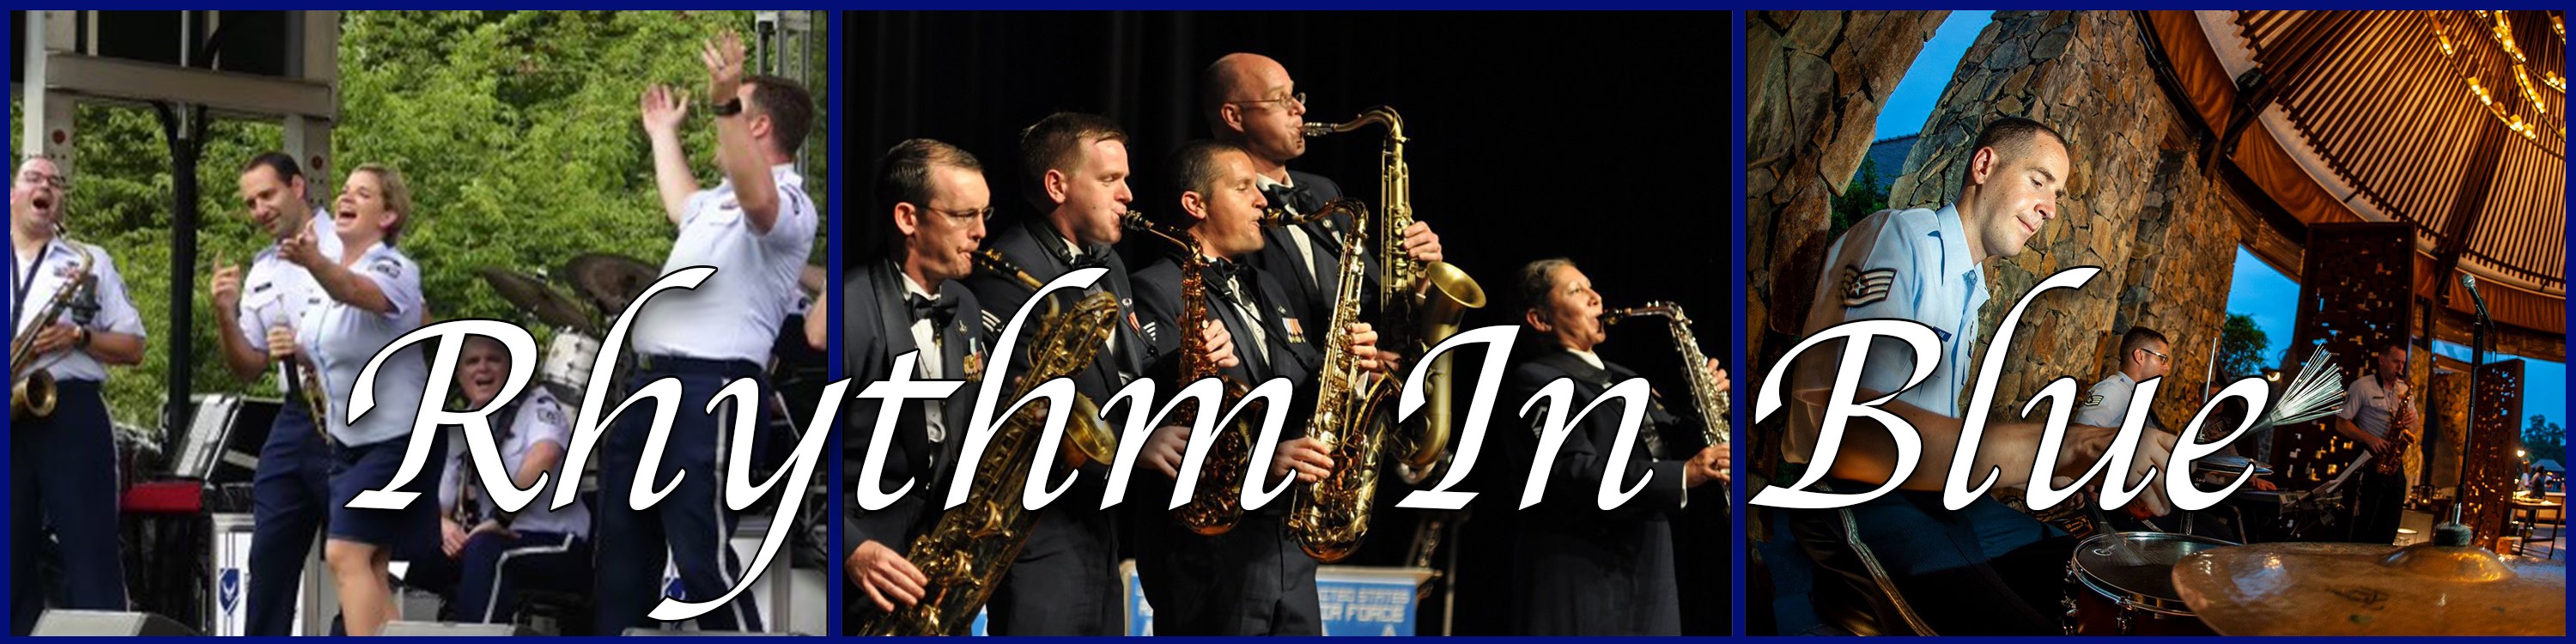 A header graphic for the Rhythm in Blue jazz ensemble.  A blue border and divider separates three pictures-- on the left, musicians in light blue short sleeved uniform cheer on stage against a green backdrop, in the center, five saxophonists in dark blue uniform play in a dark interior stage, and on the right a percussionist in light blue short sleeves plays the drum set in a glowing hall with views of a blue sky outdoors.  White italic text over all three reads "Rhythm in Blue."